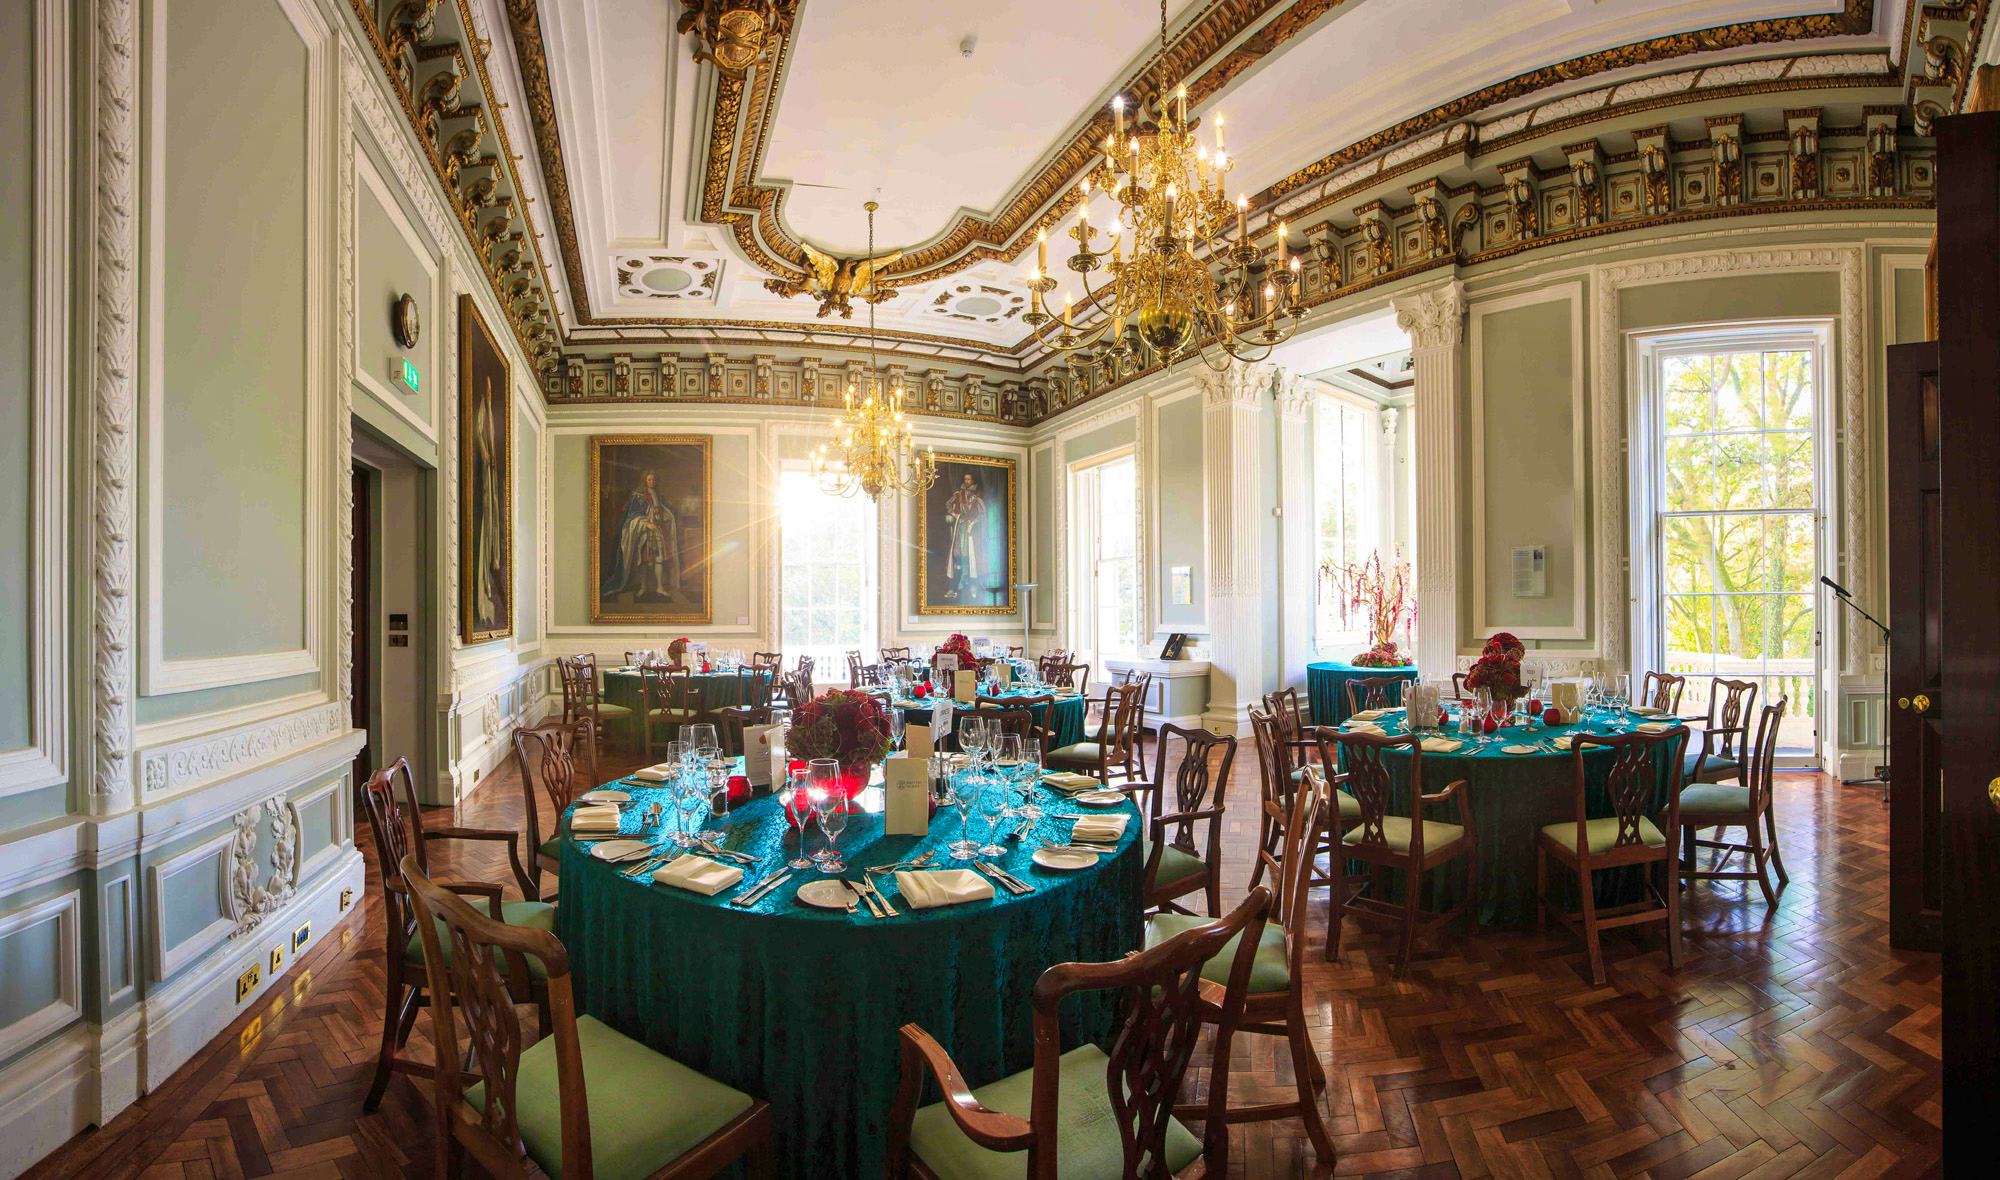 Christmas at 10-11 Carlton House Terrace british academy london venues private hire events banqueting dining